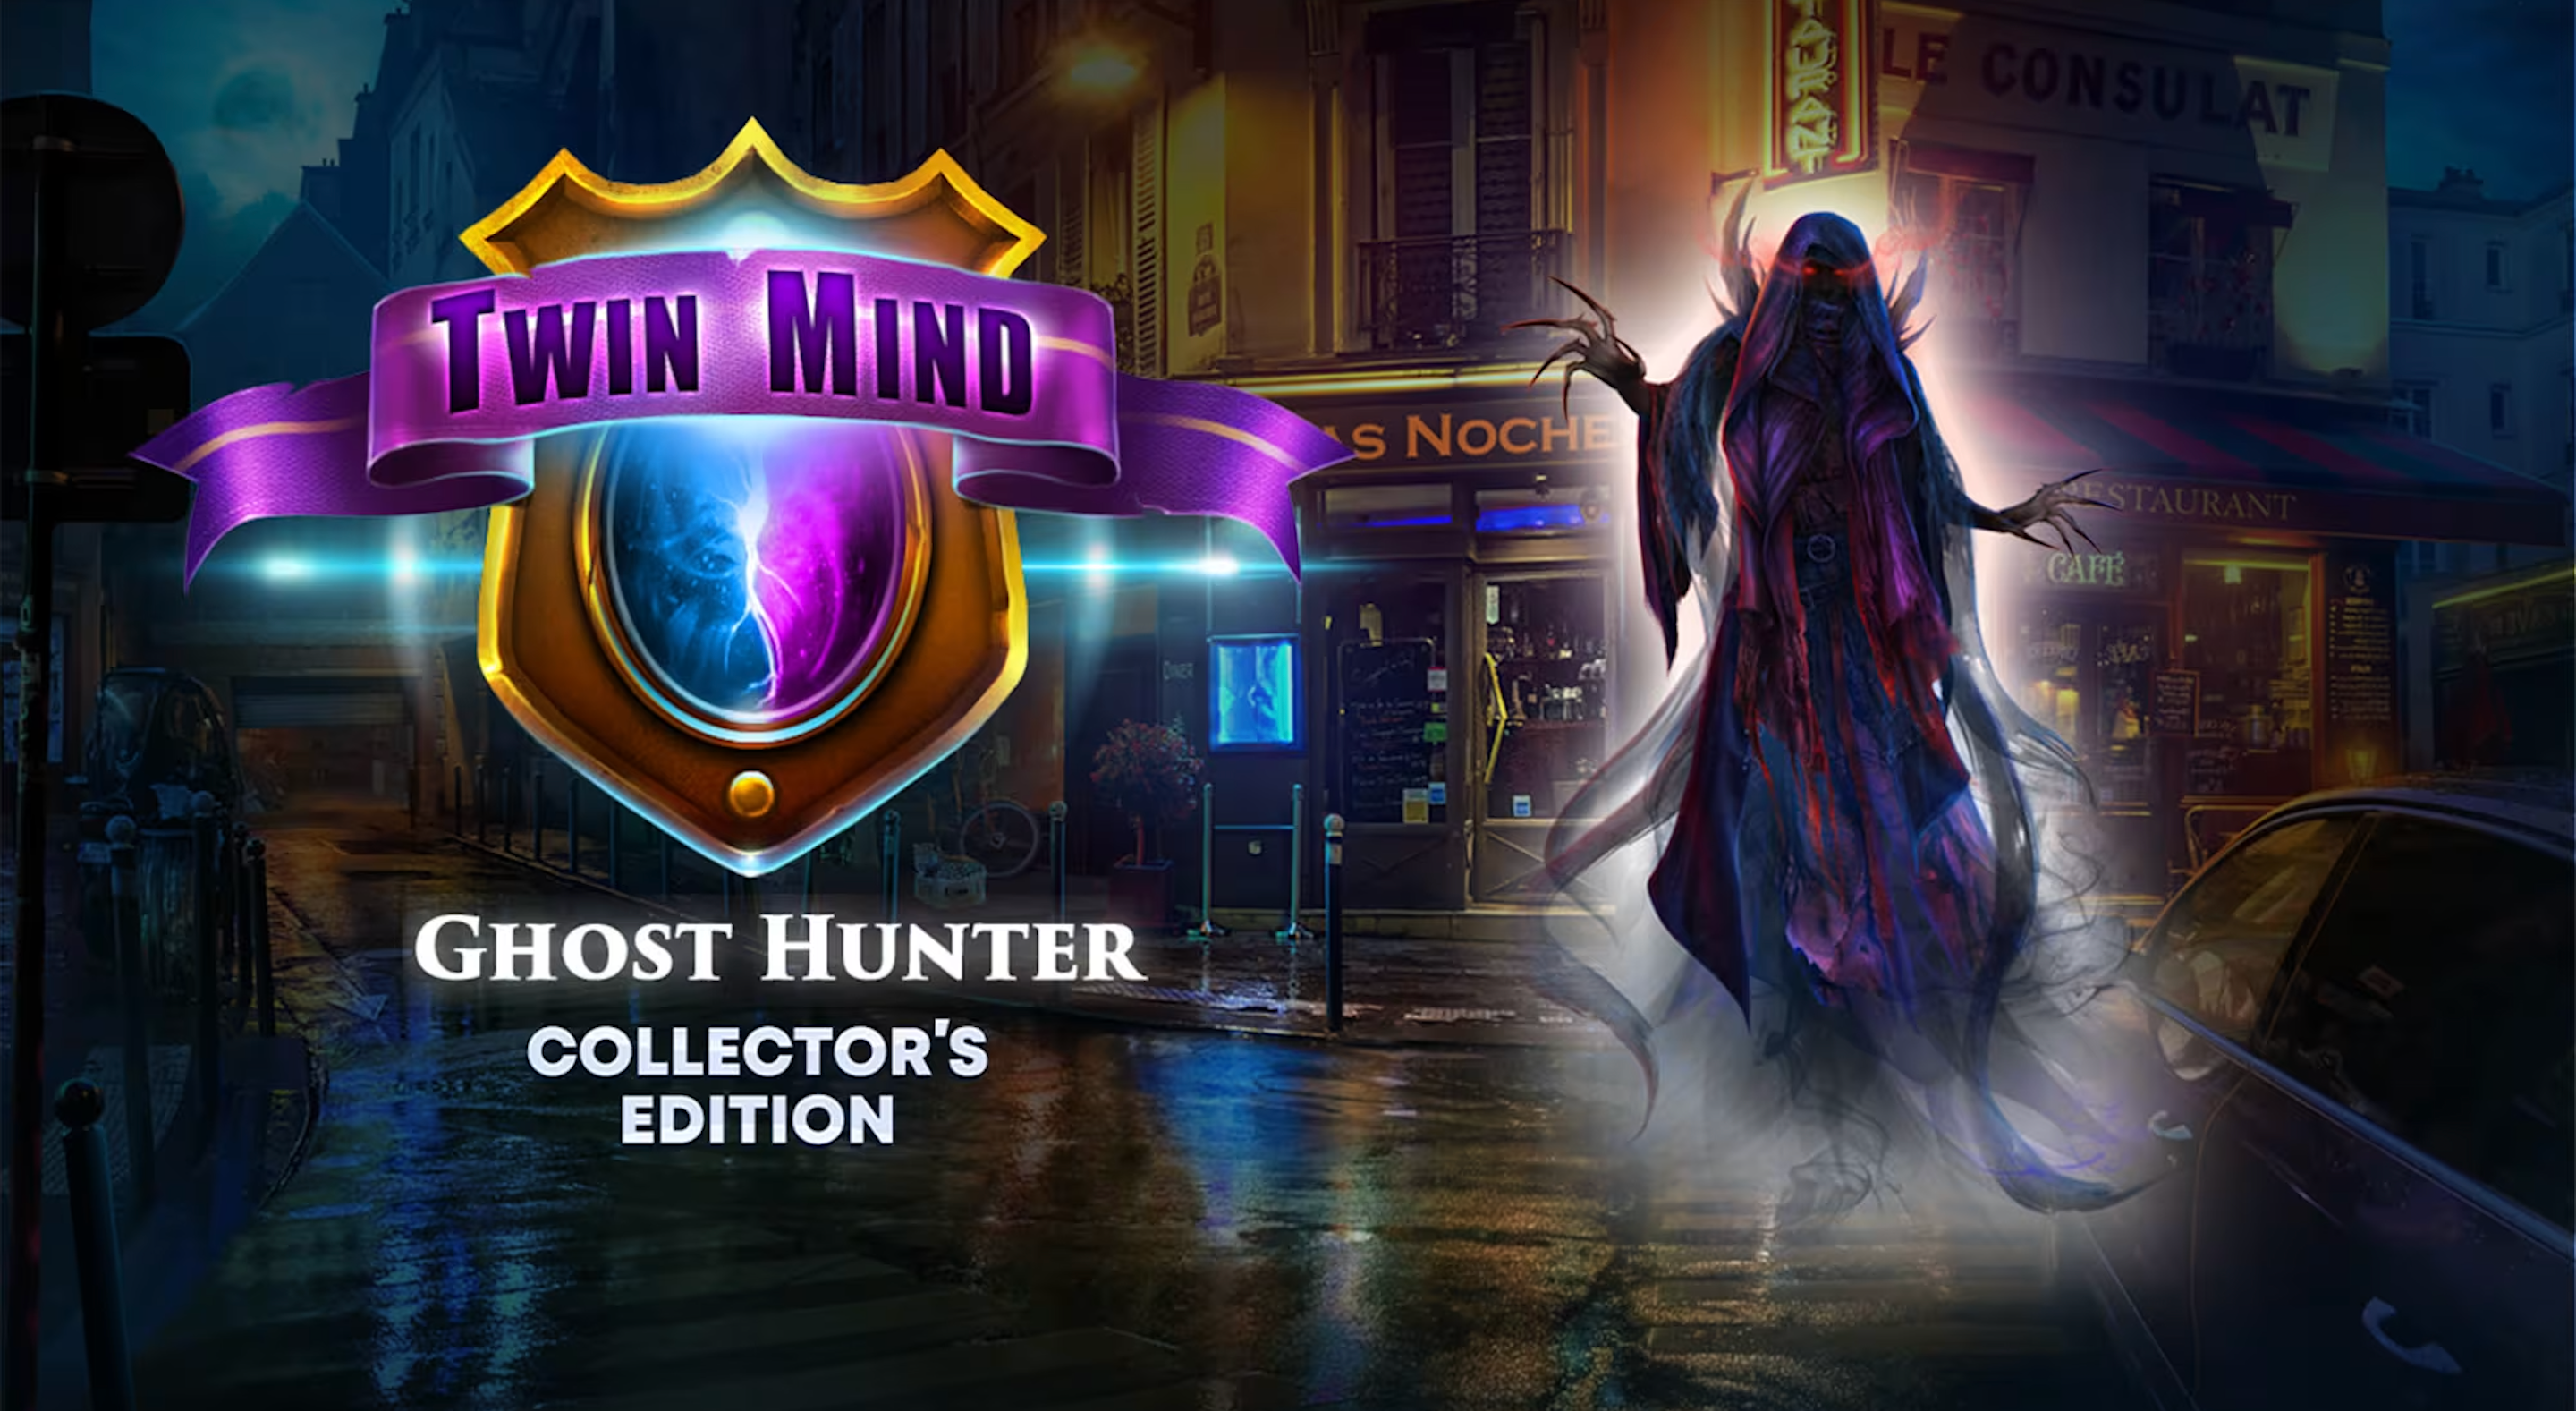 Twin Mind: Ghost Hunter Collector’s Edition for the Nintendo Switch